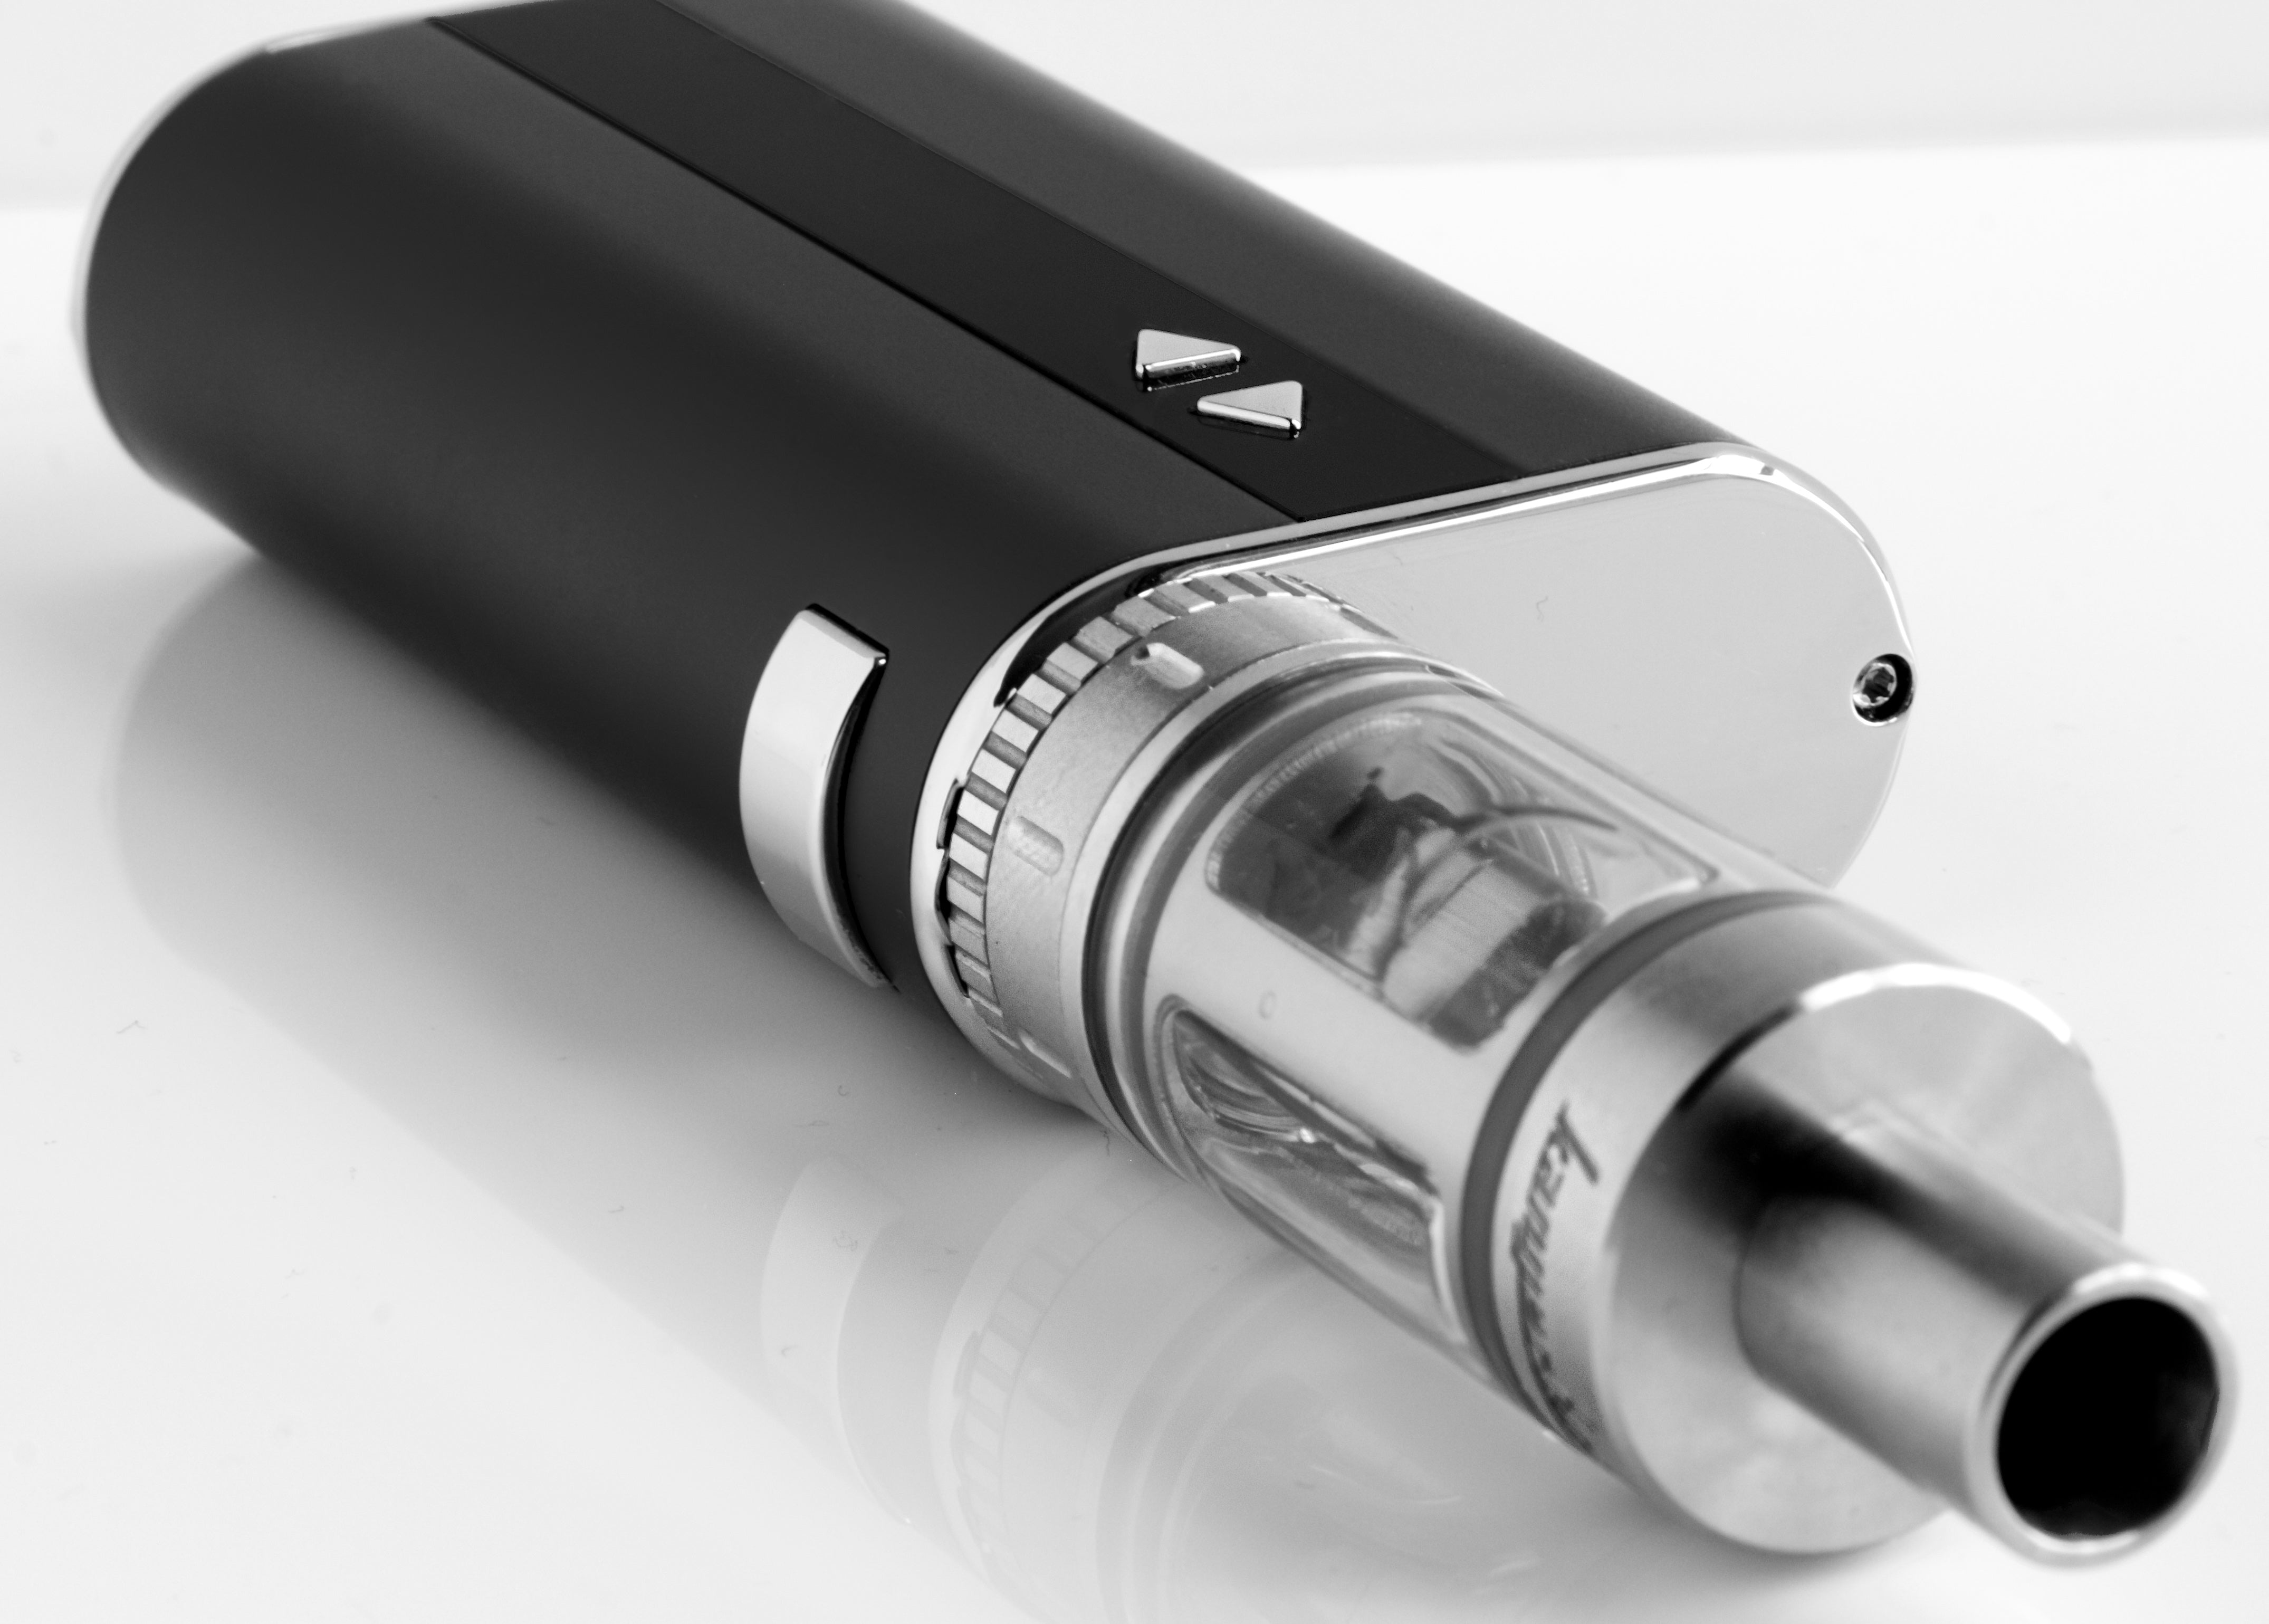 Can You Use E-Cigarettes Where Smoking is Prohibited?